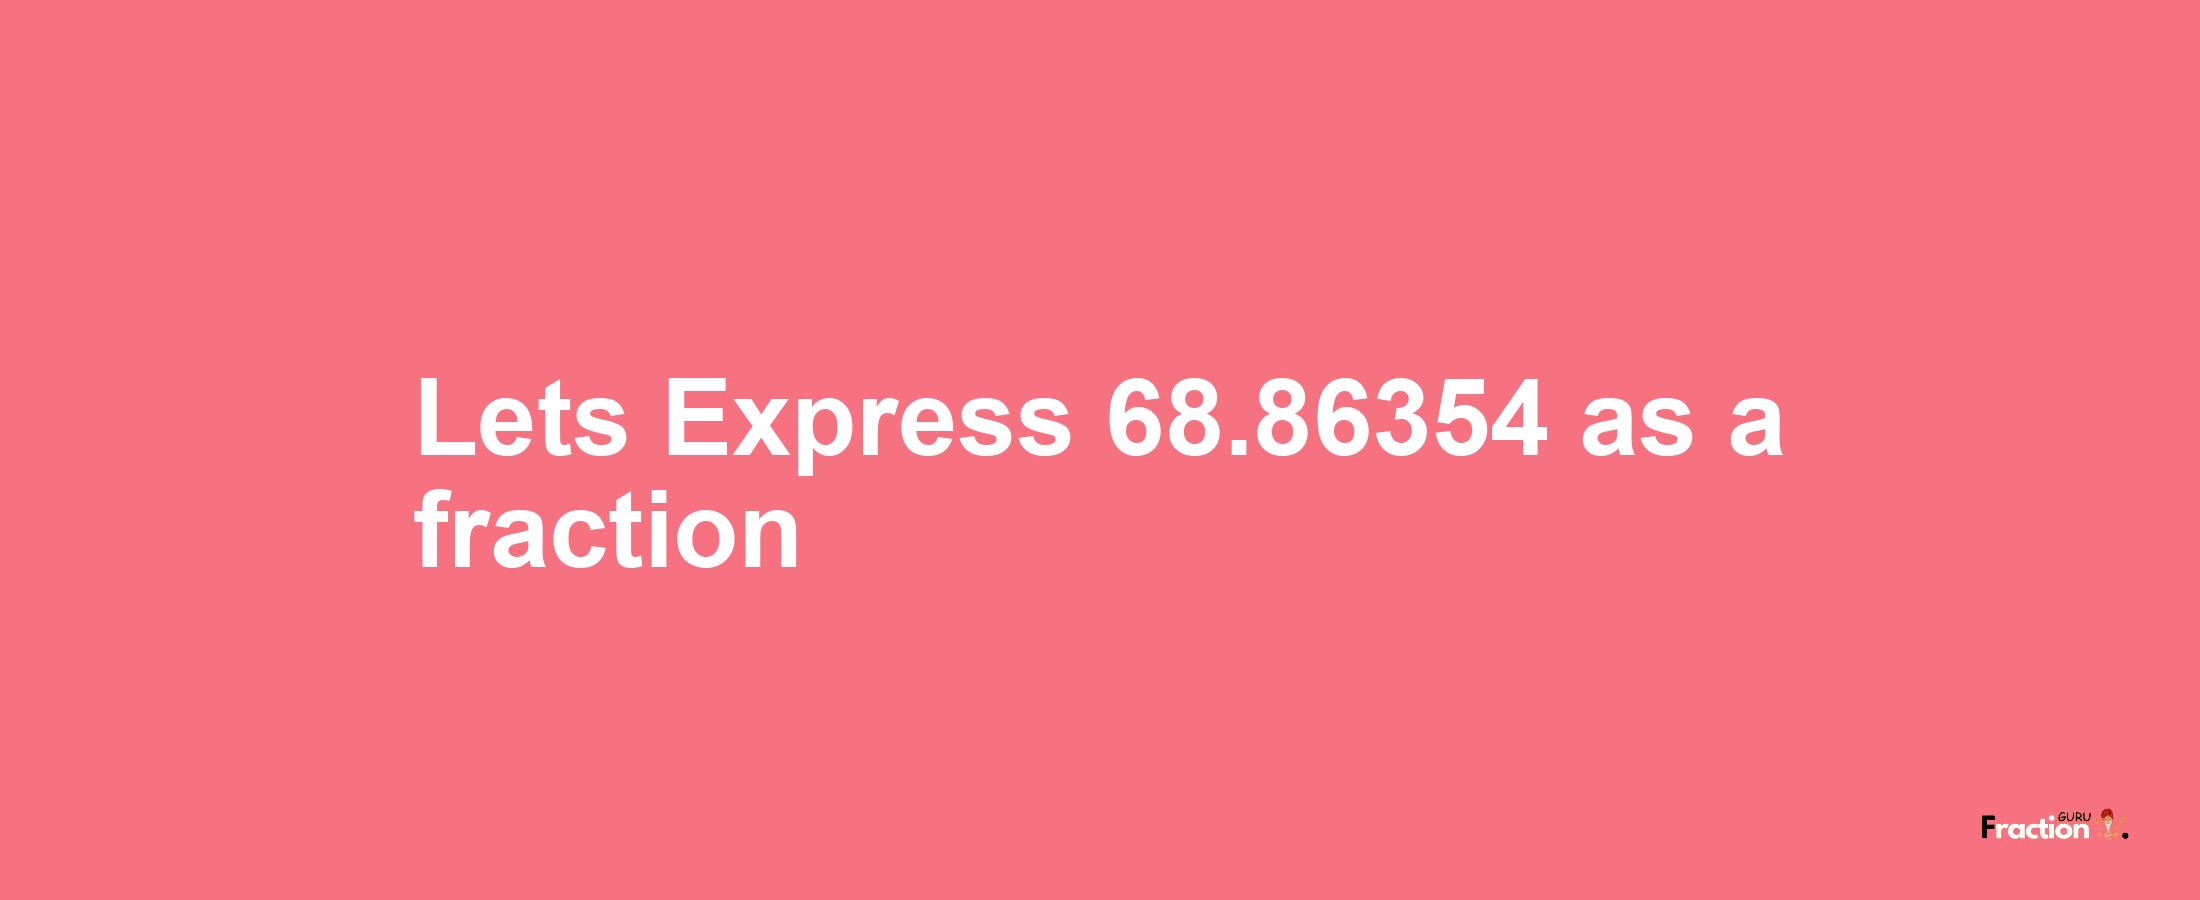 Lets Express 68.86354 as afraction